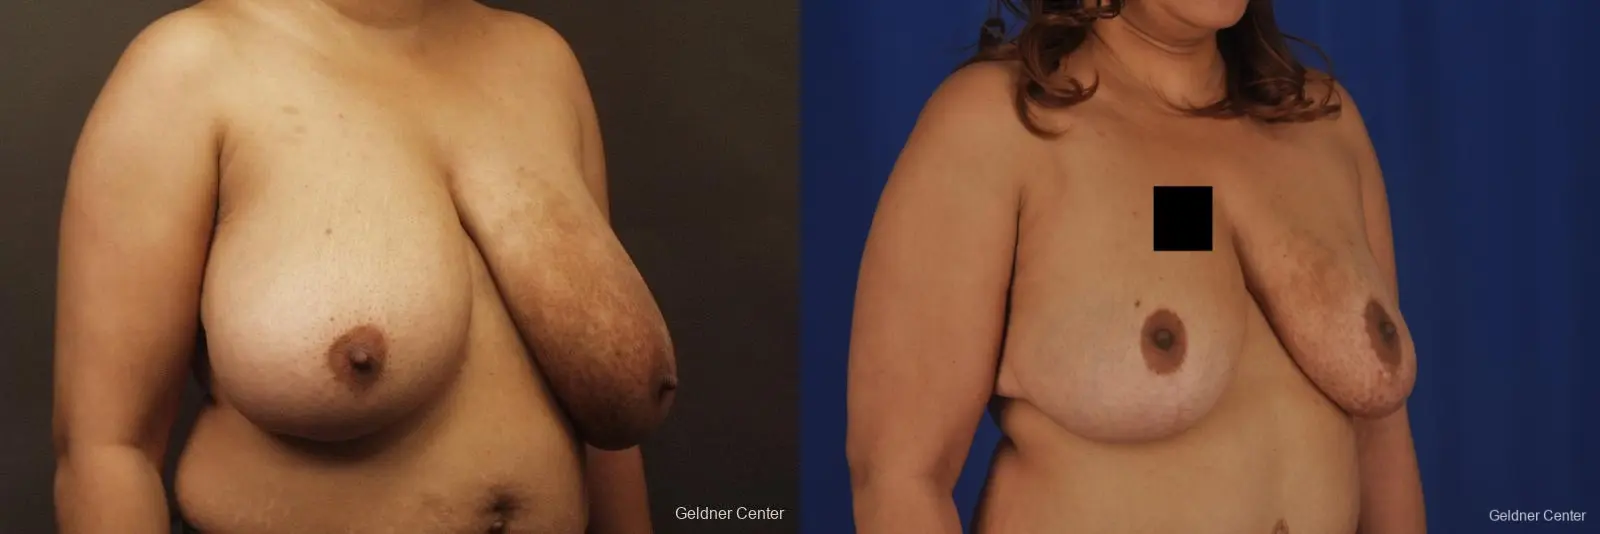 Chicago Breast Reduction 2375 - Before and After 3